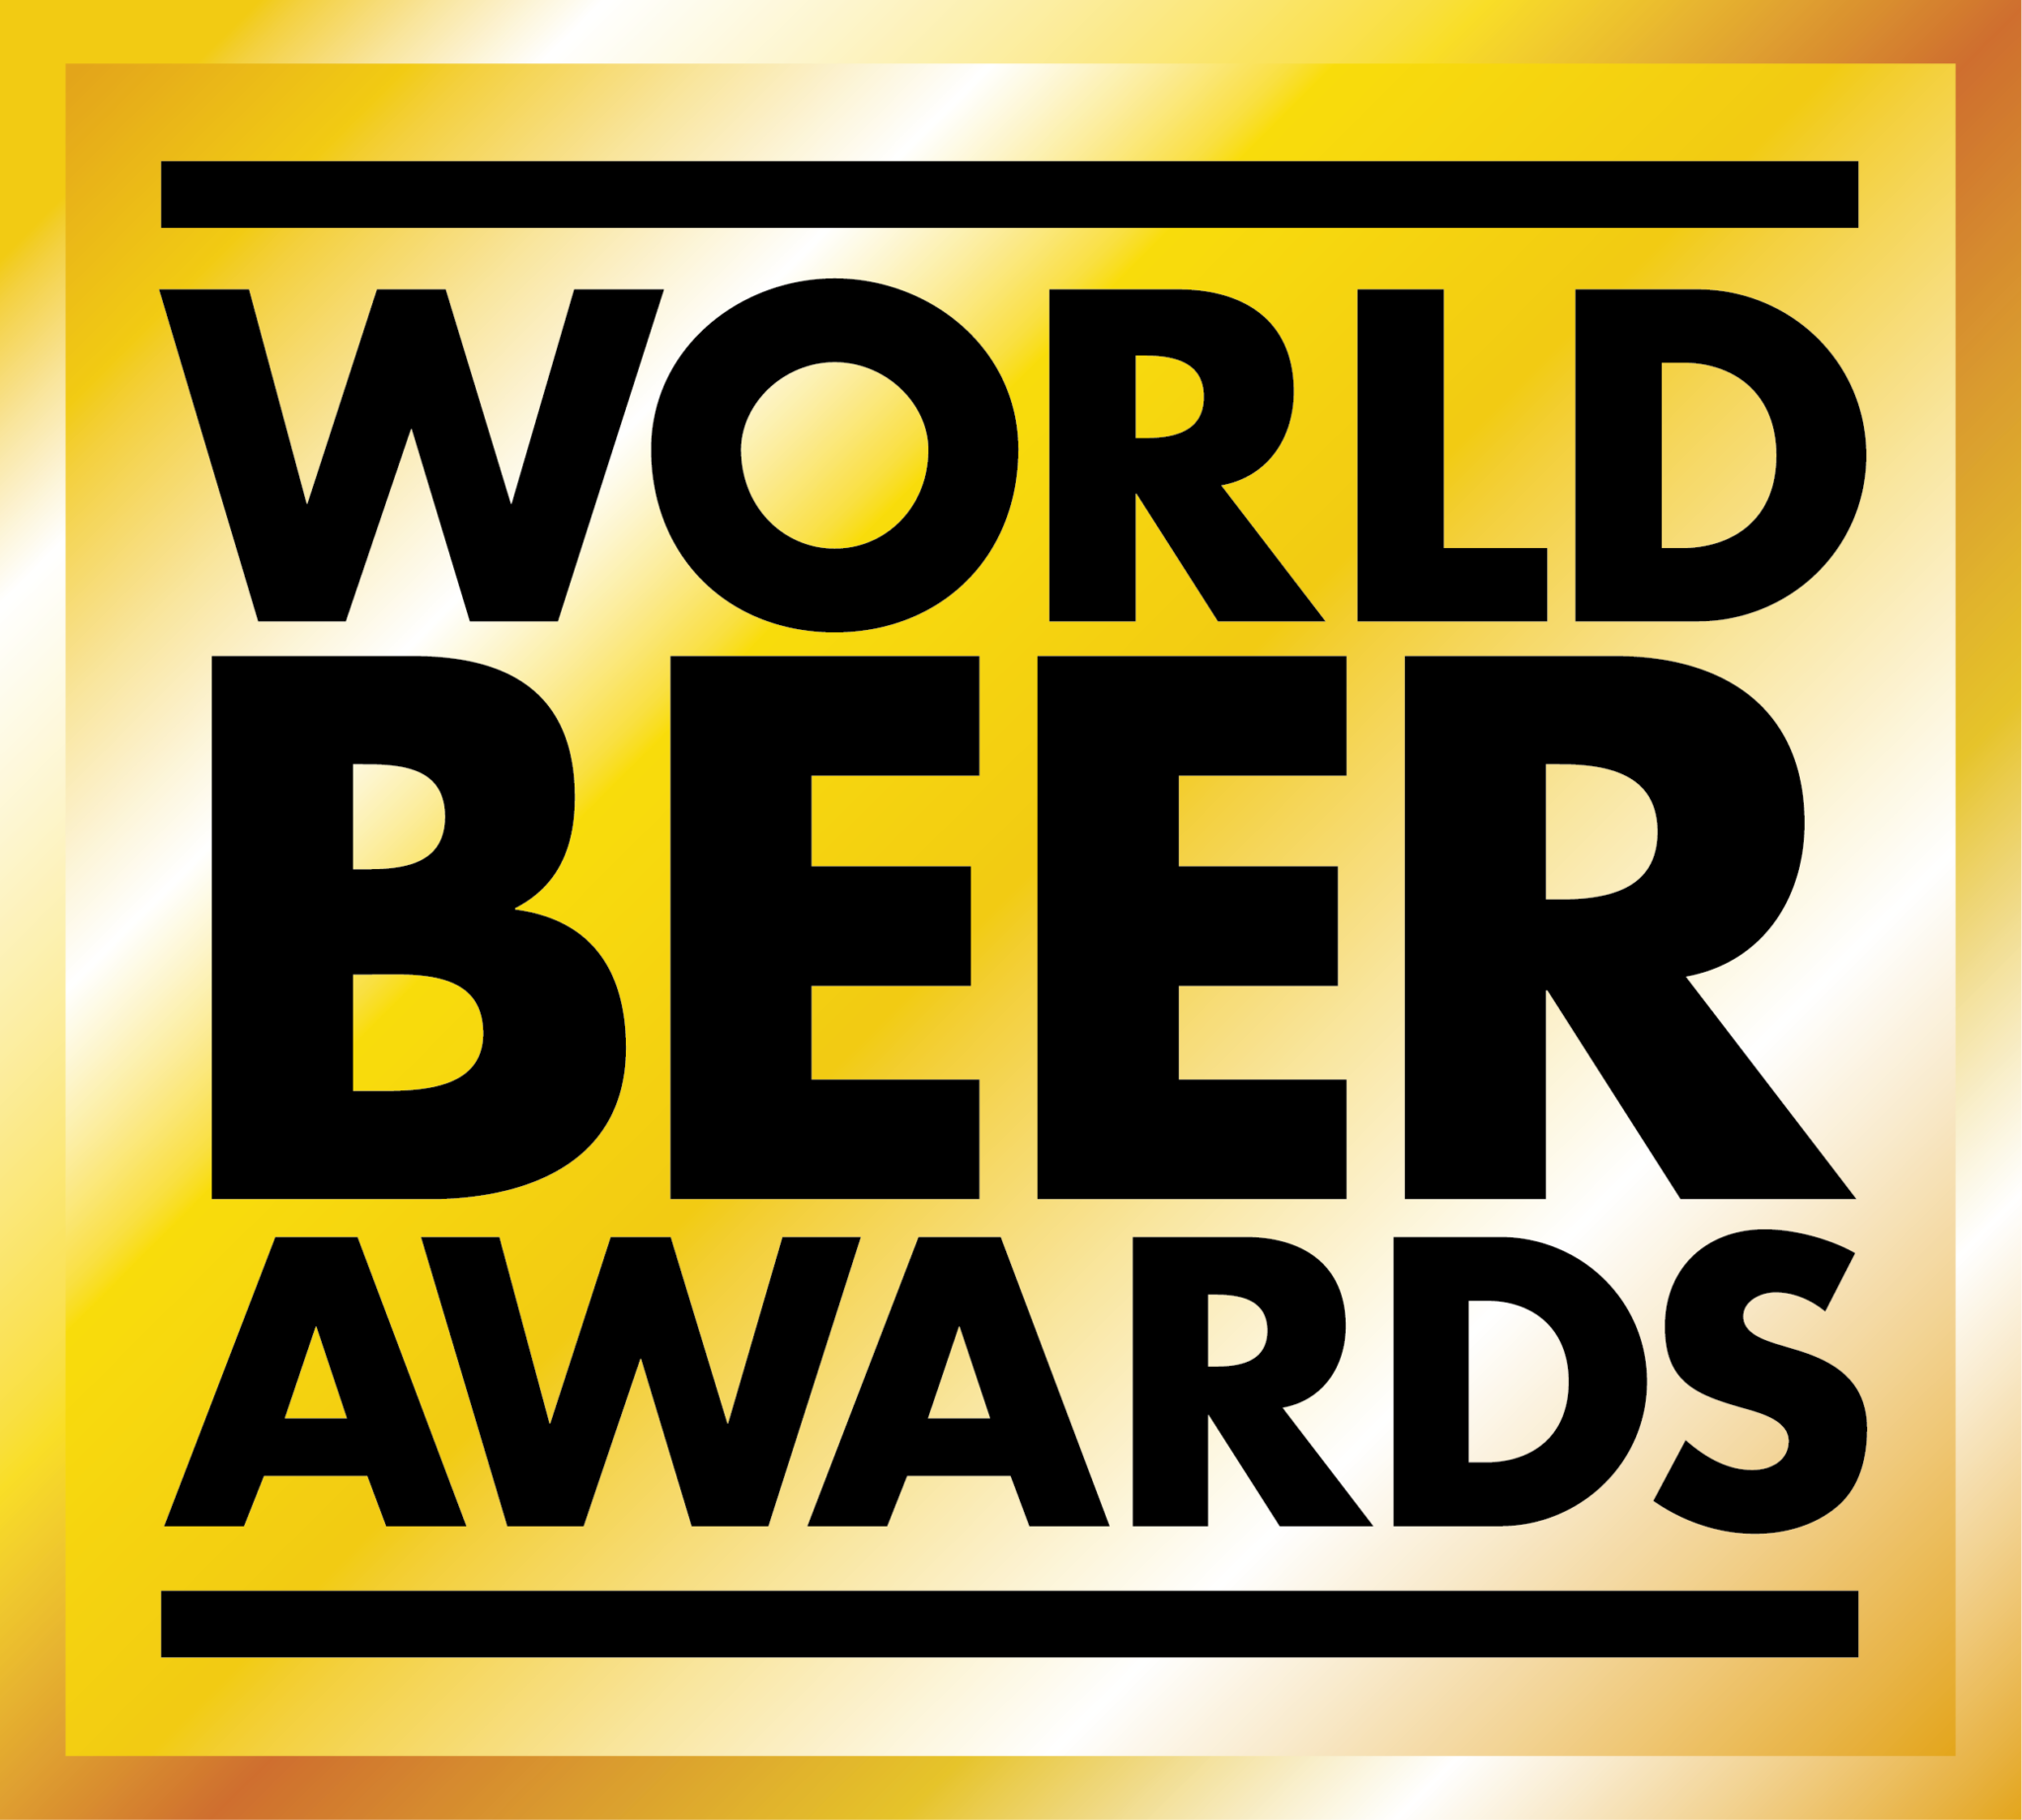 Final World Beer Awards tasting and country winners celebration date